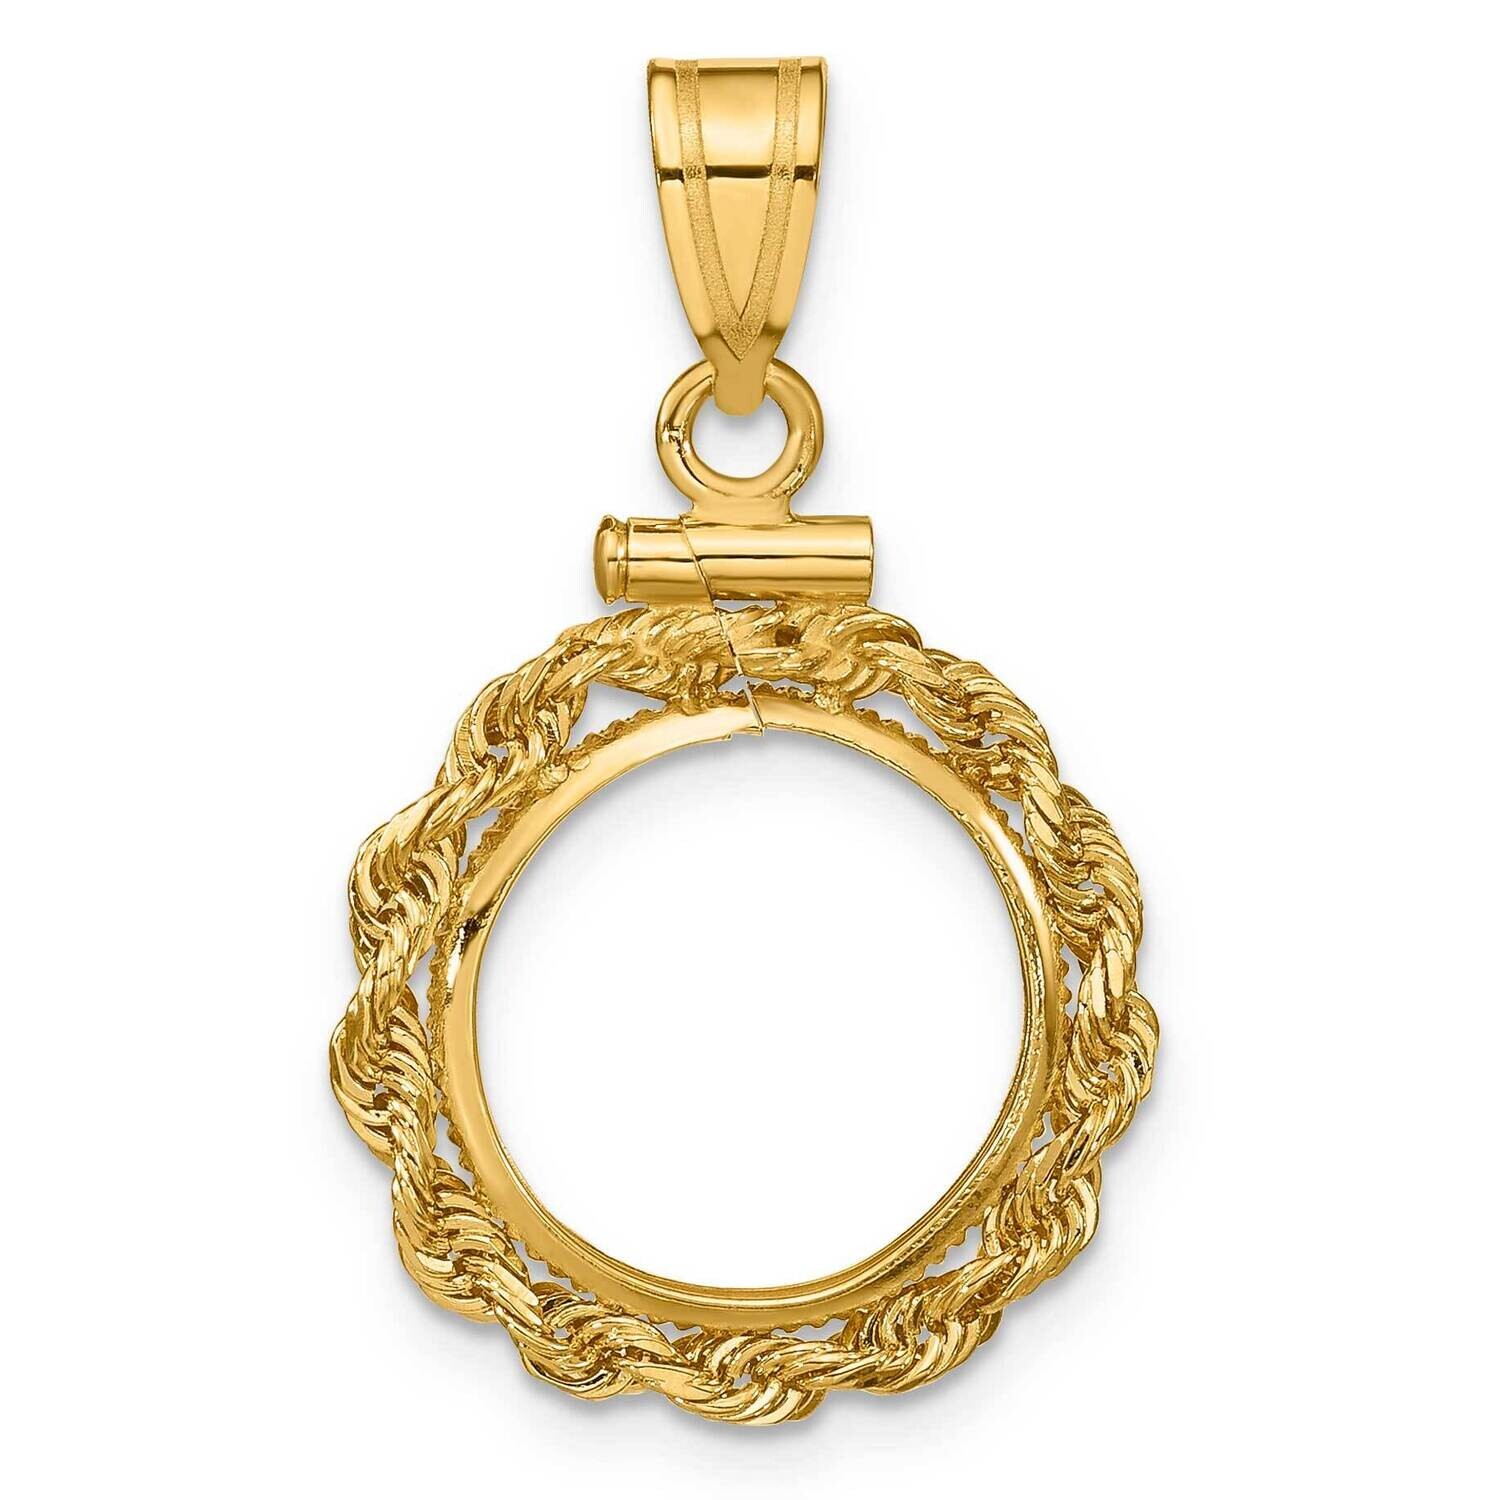 WidebDistinguished Coin Jewelry Rope Screw Top 13.0mm X 1.1mm Coin Bezel Pendant 14k Gold C1215/13.0